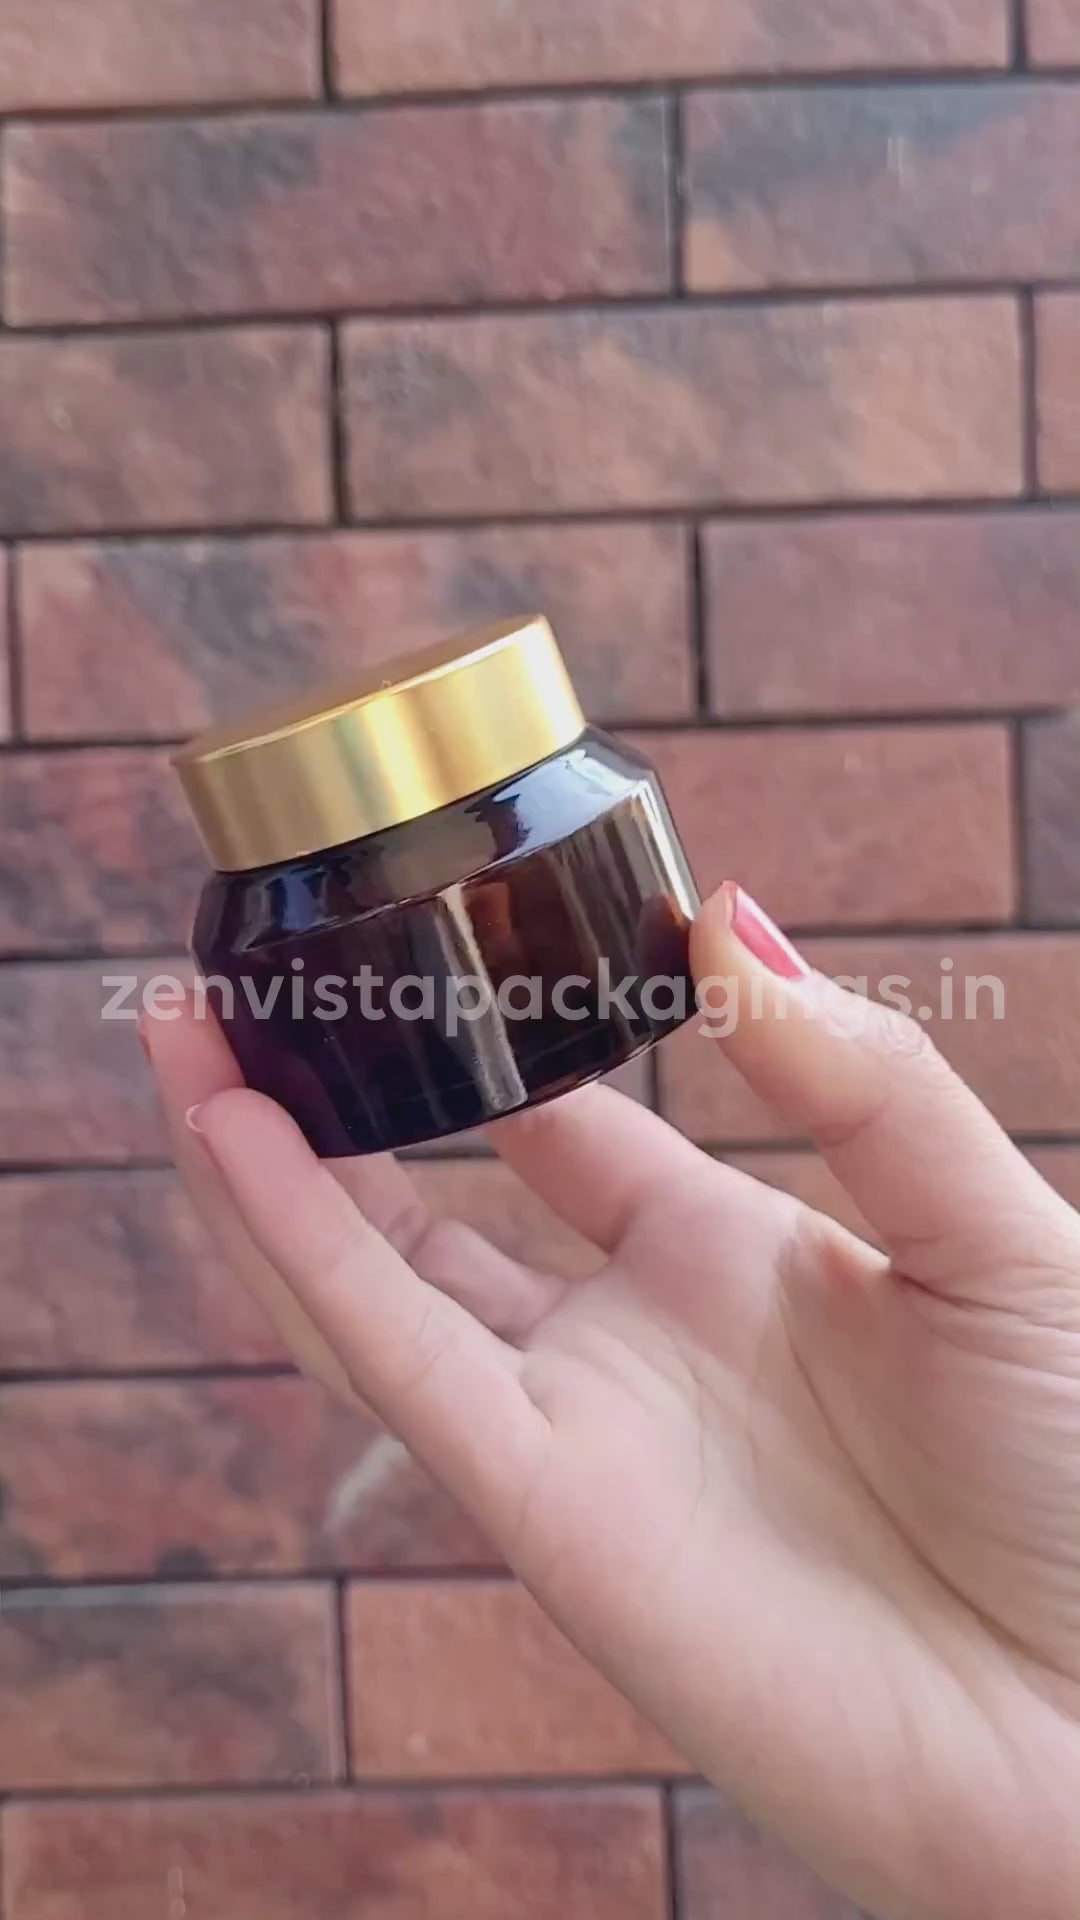 Amber Color Glass Jar With Satin Gold Lid For Lip Balm, Body Butter, Cream- 25gm, 30Gm,50 Gm [ZMJ12]